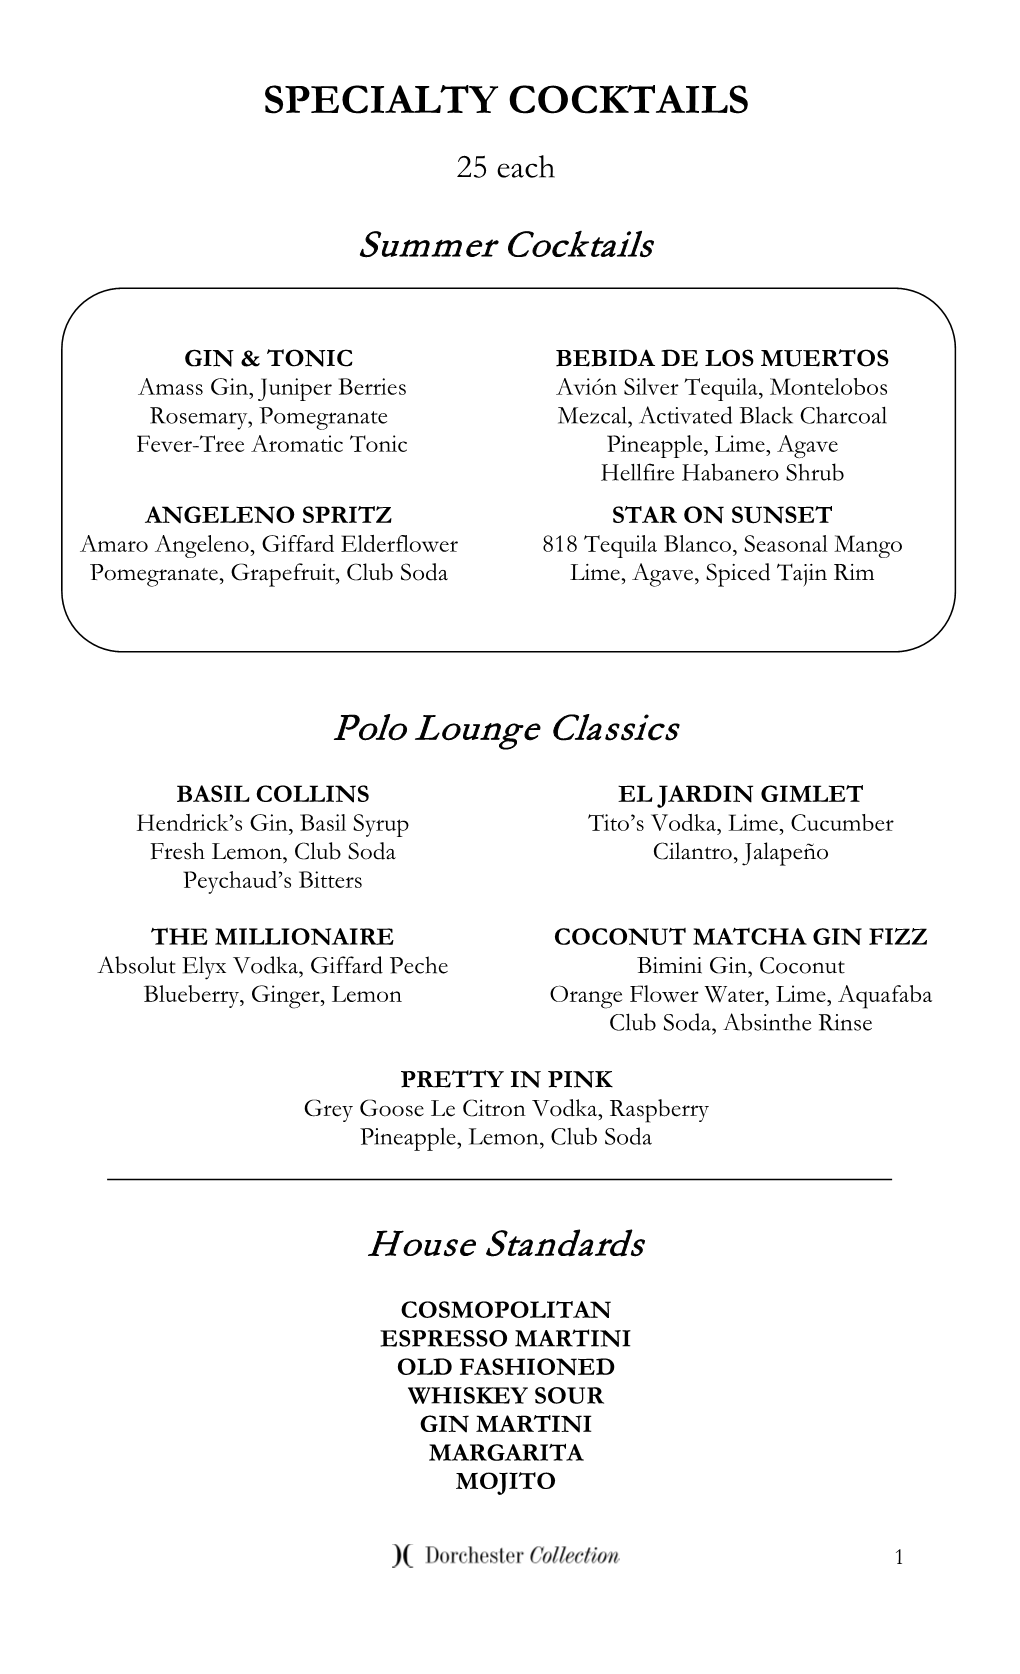 SPECIALTY COCKTAILS 25 Each